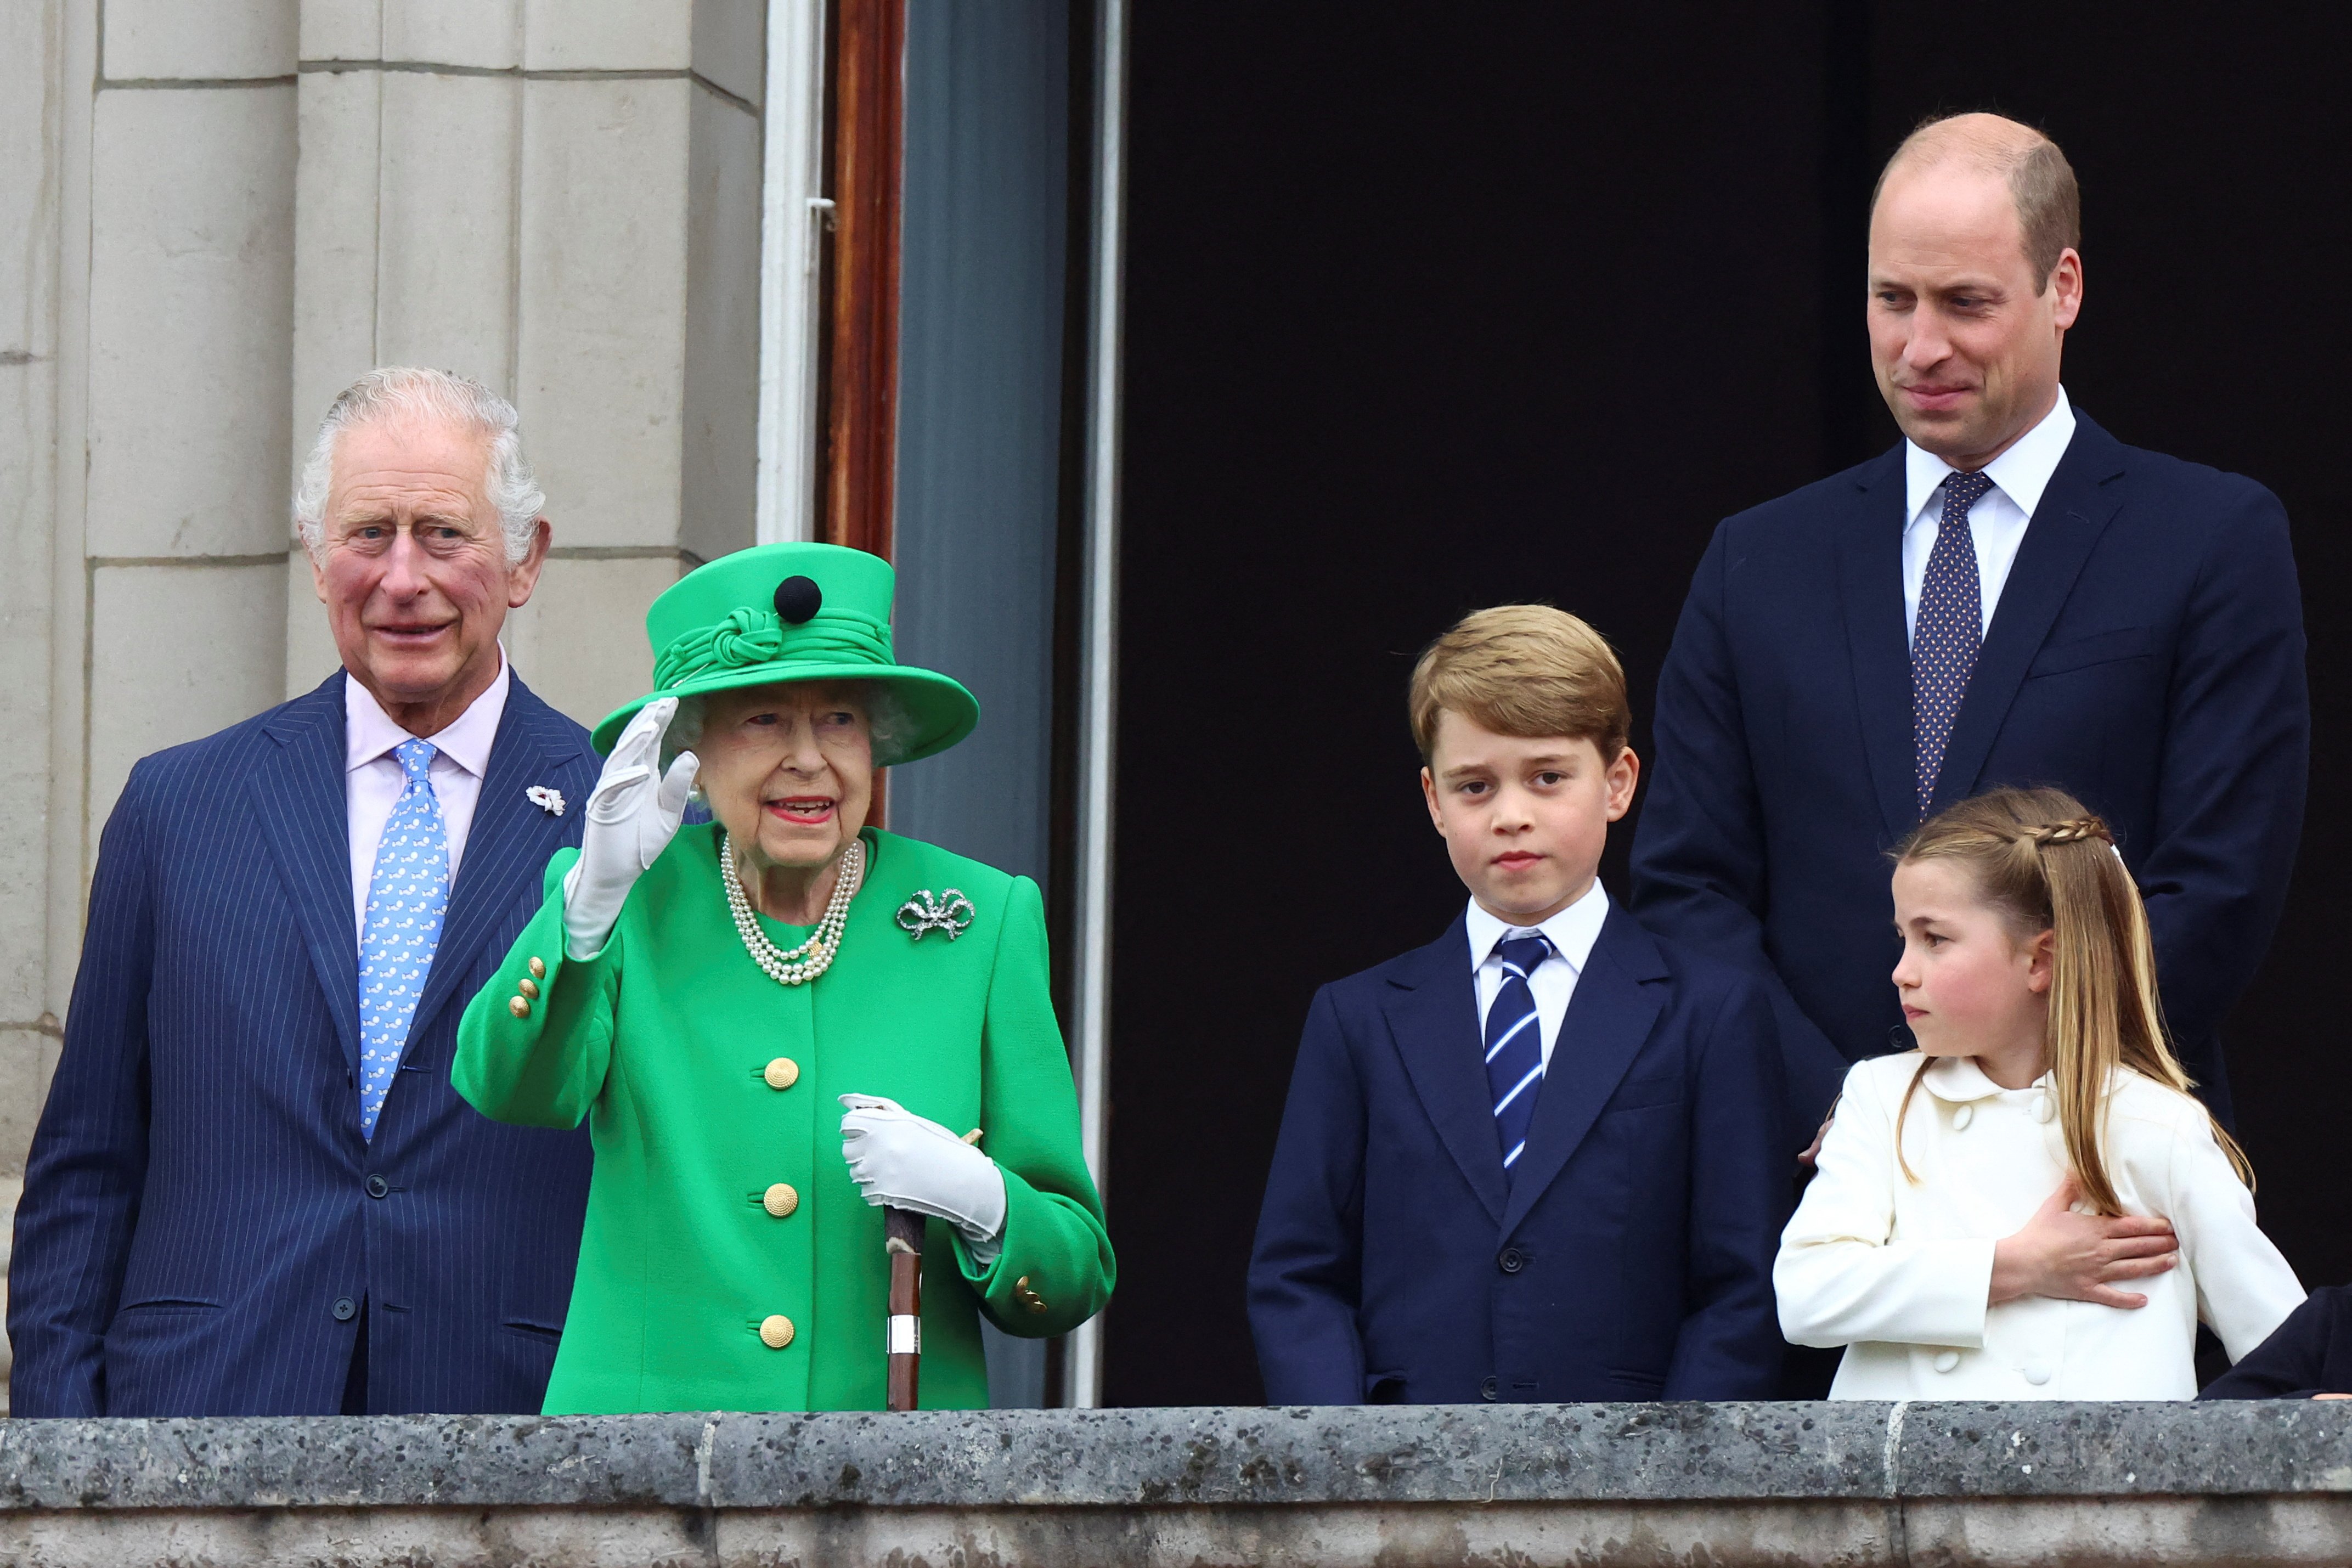 King Charles, Queen Elizabeth II, Prince George, Prince William, and Princess Charlotte stand on a balcony during the Platinum Jubilee Pageant on June 05, 2022, in London, England. | Source: Getty Images